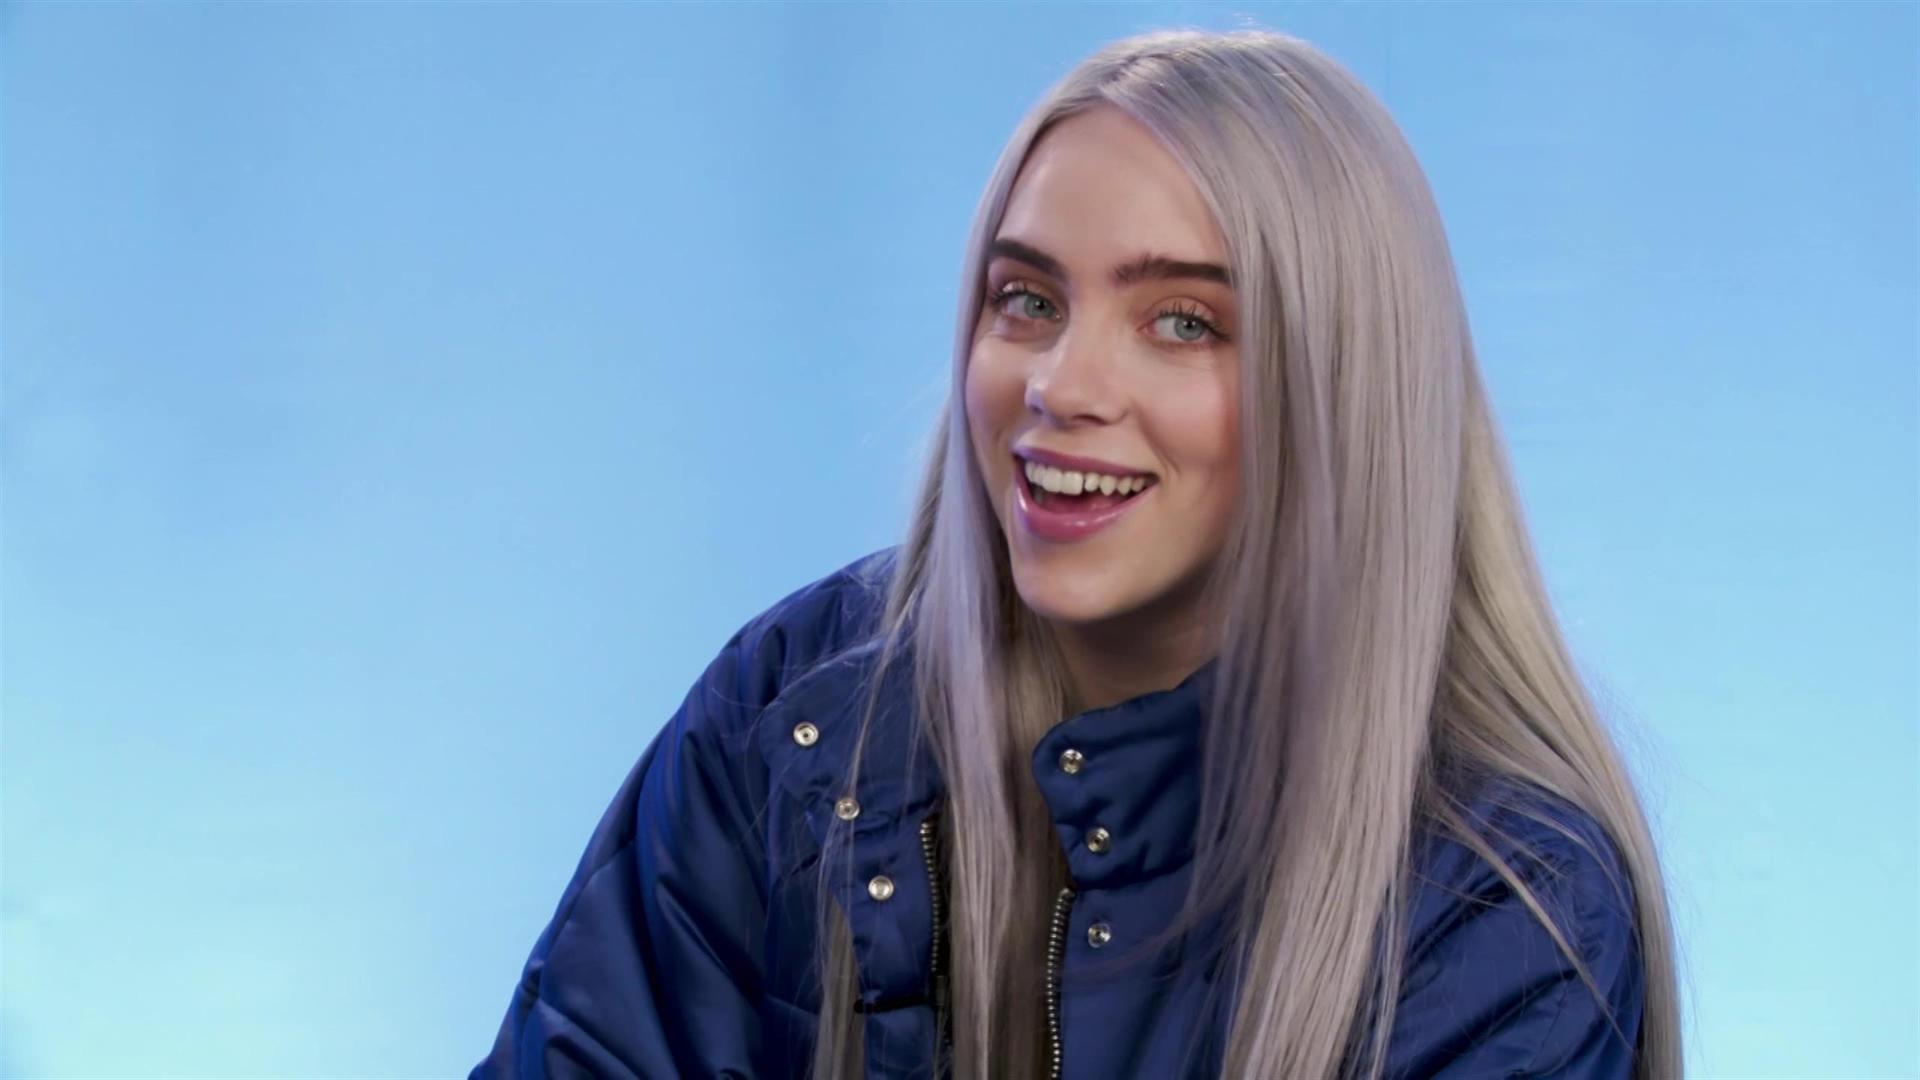 OMG billie with blue hair and then billieeilish